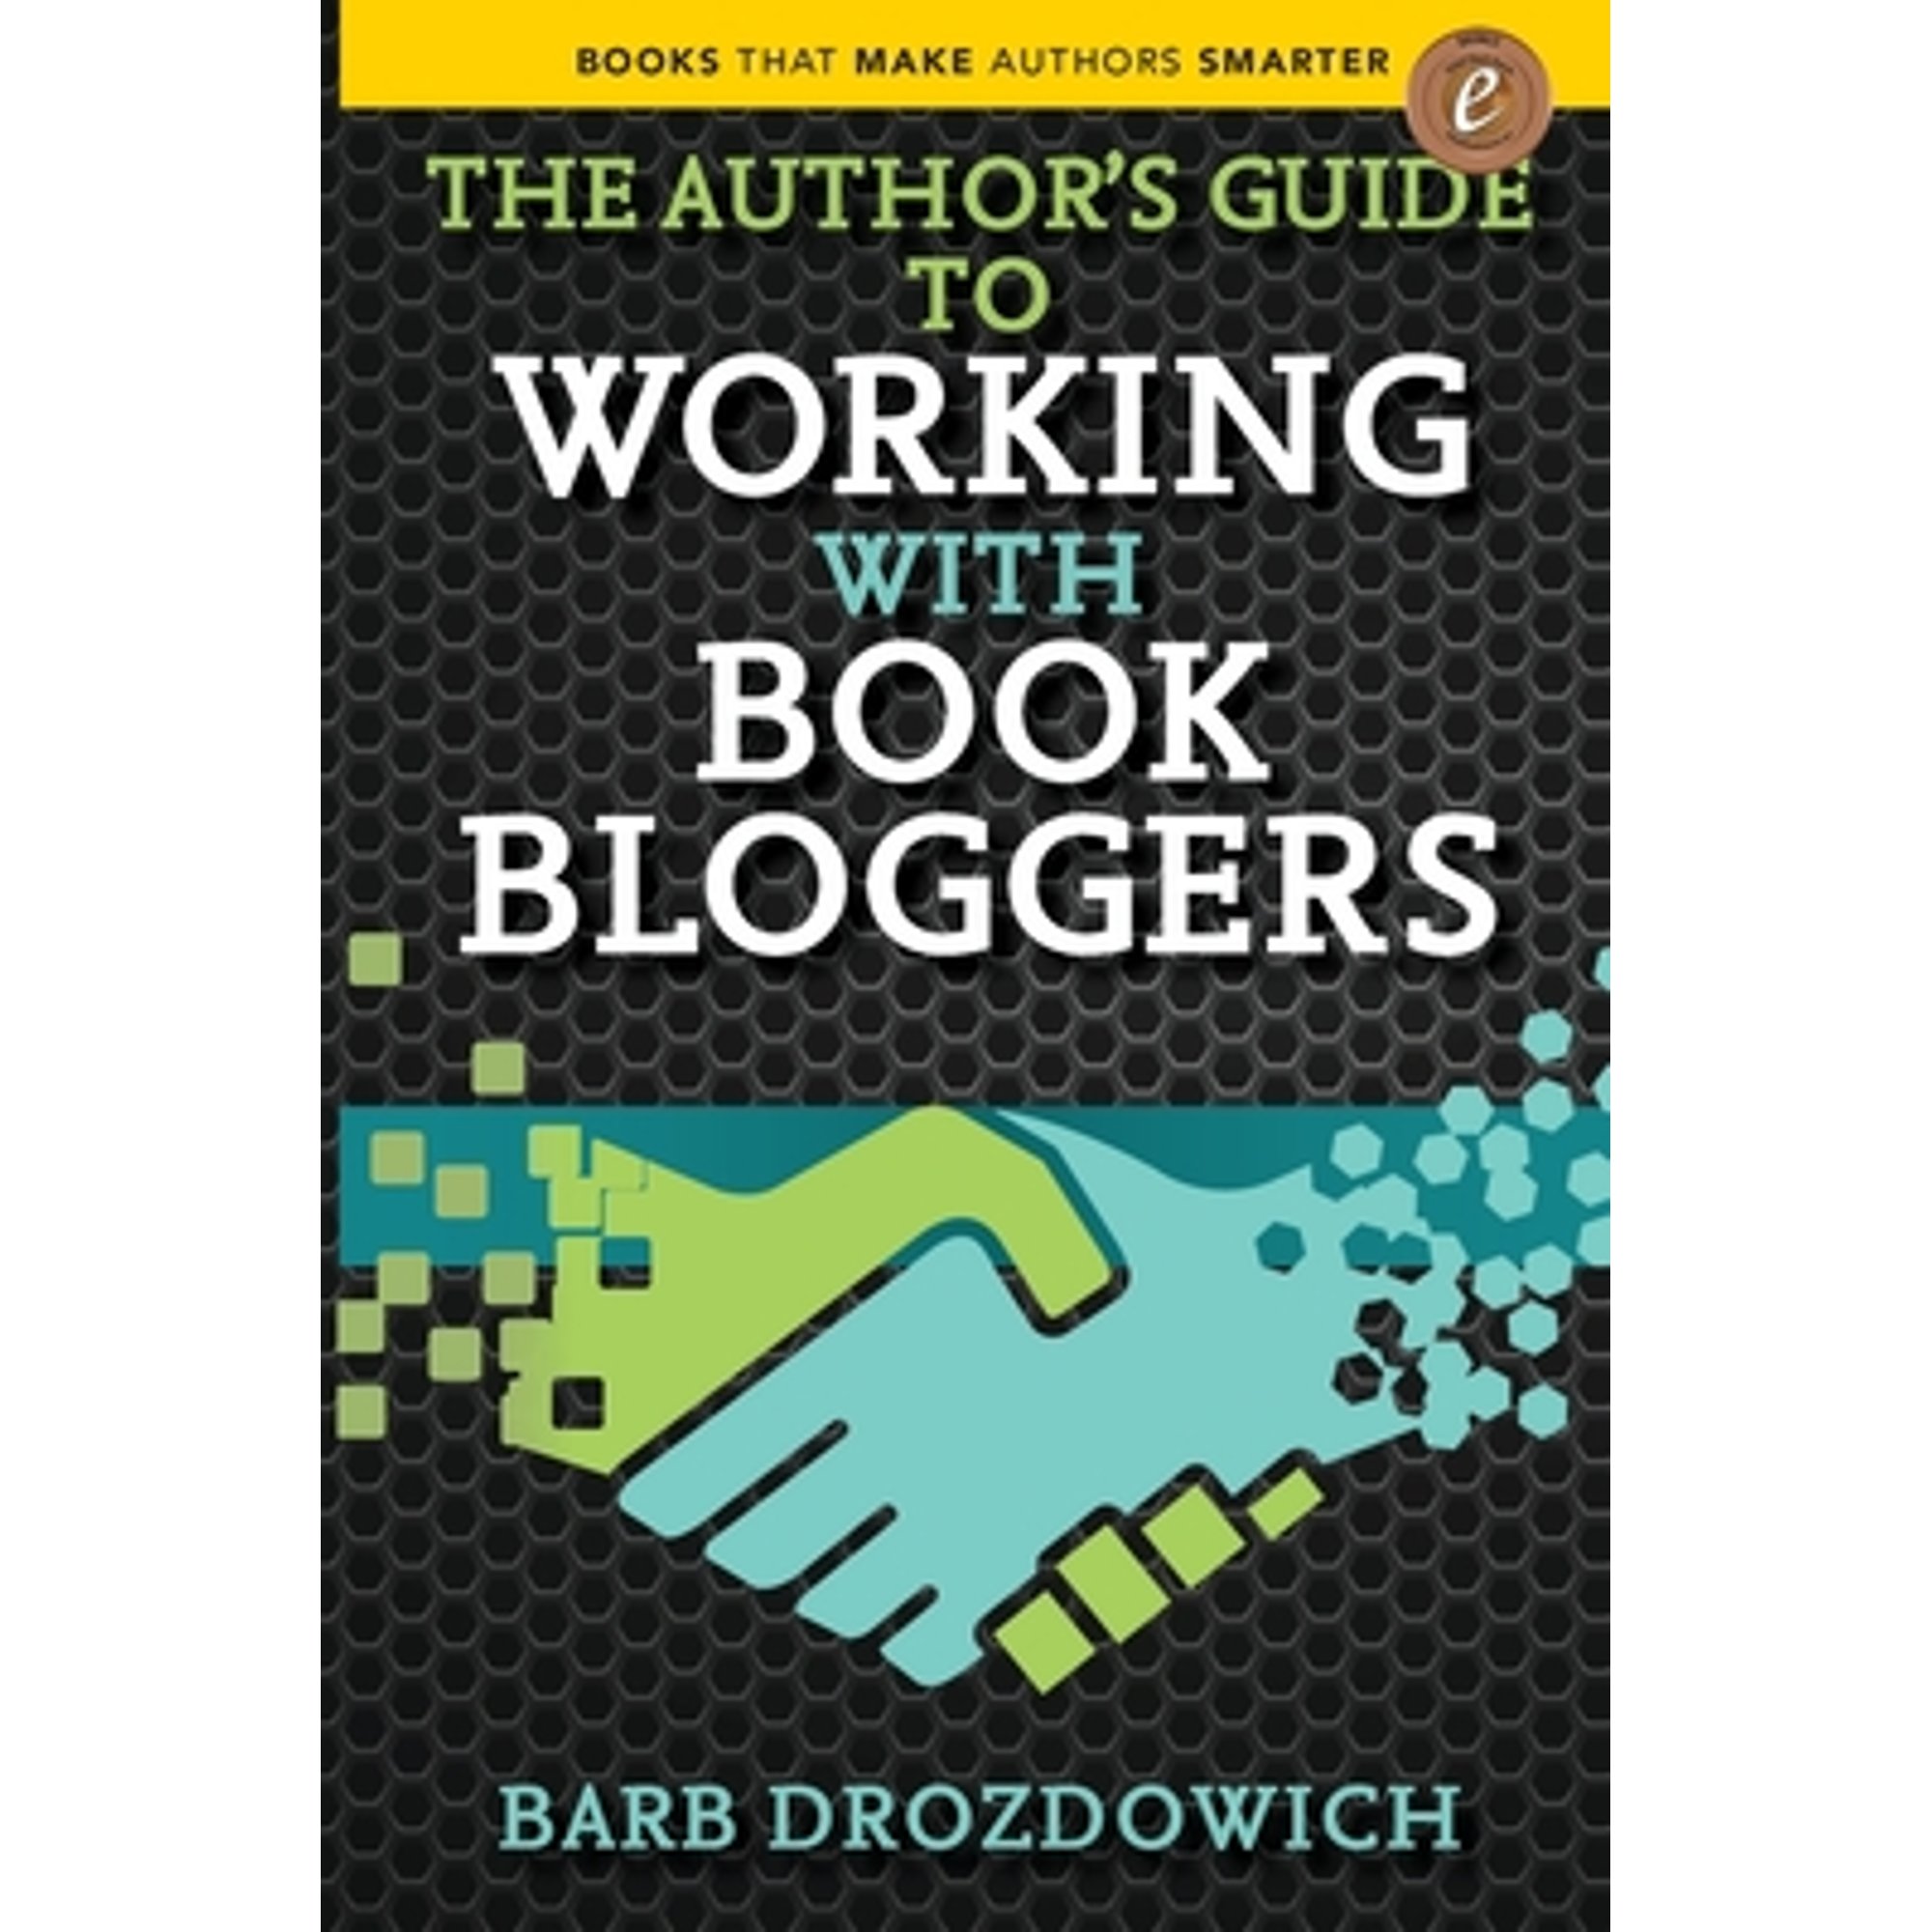 The Author's Guide to Working with Book Bloggers (Paperback) - image 1 of 1